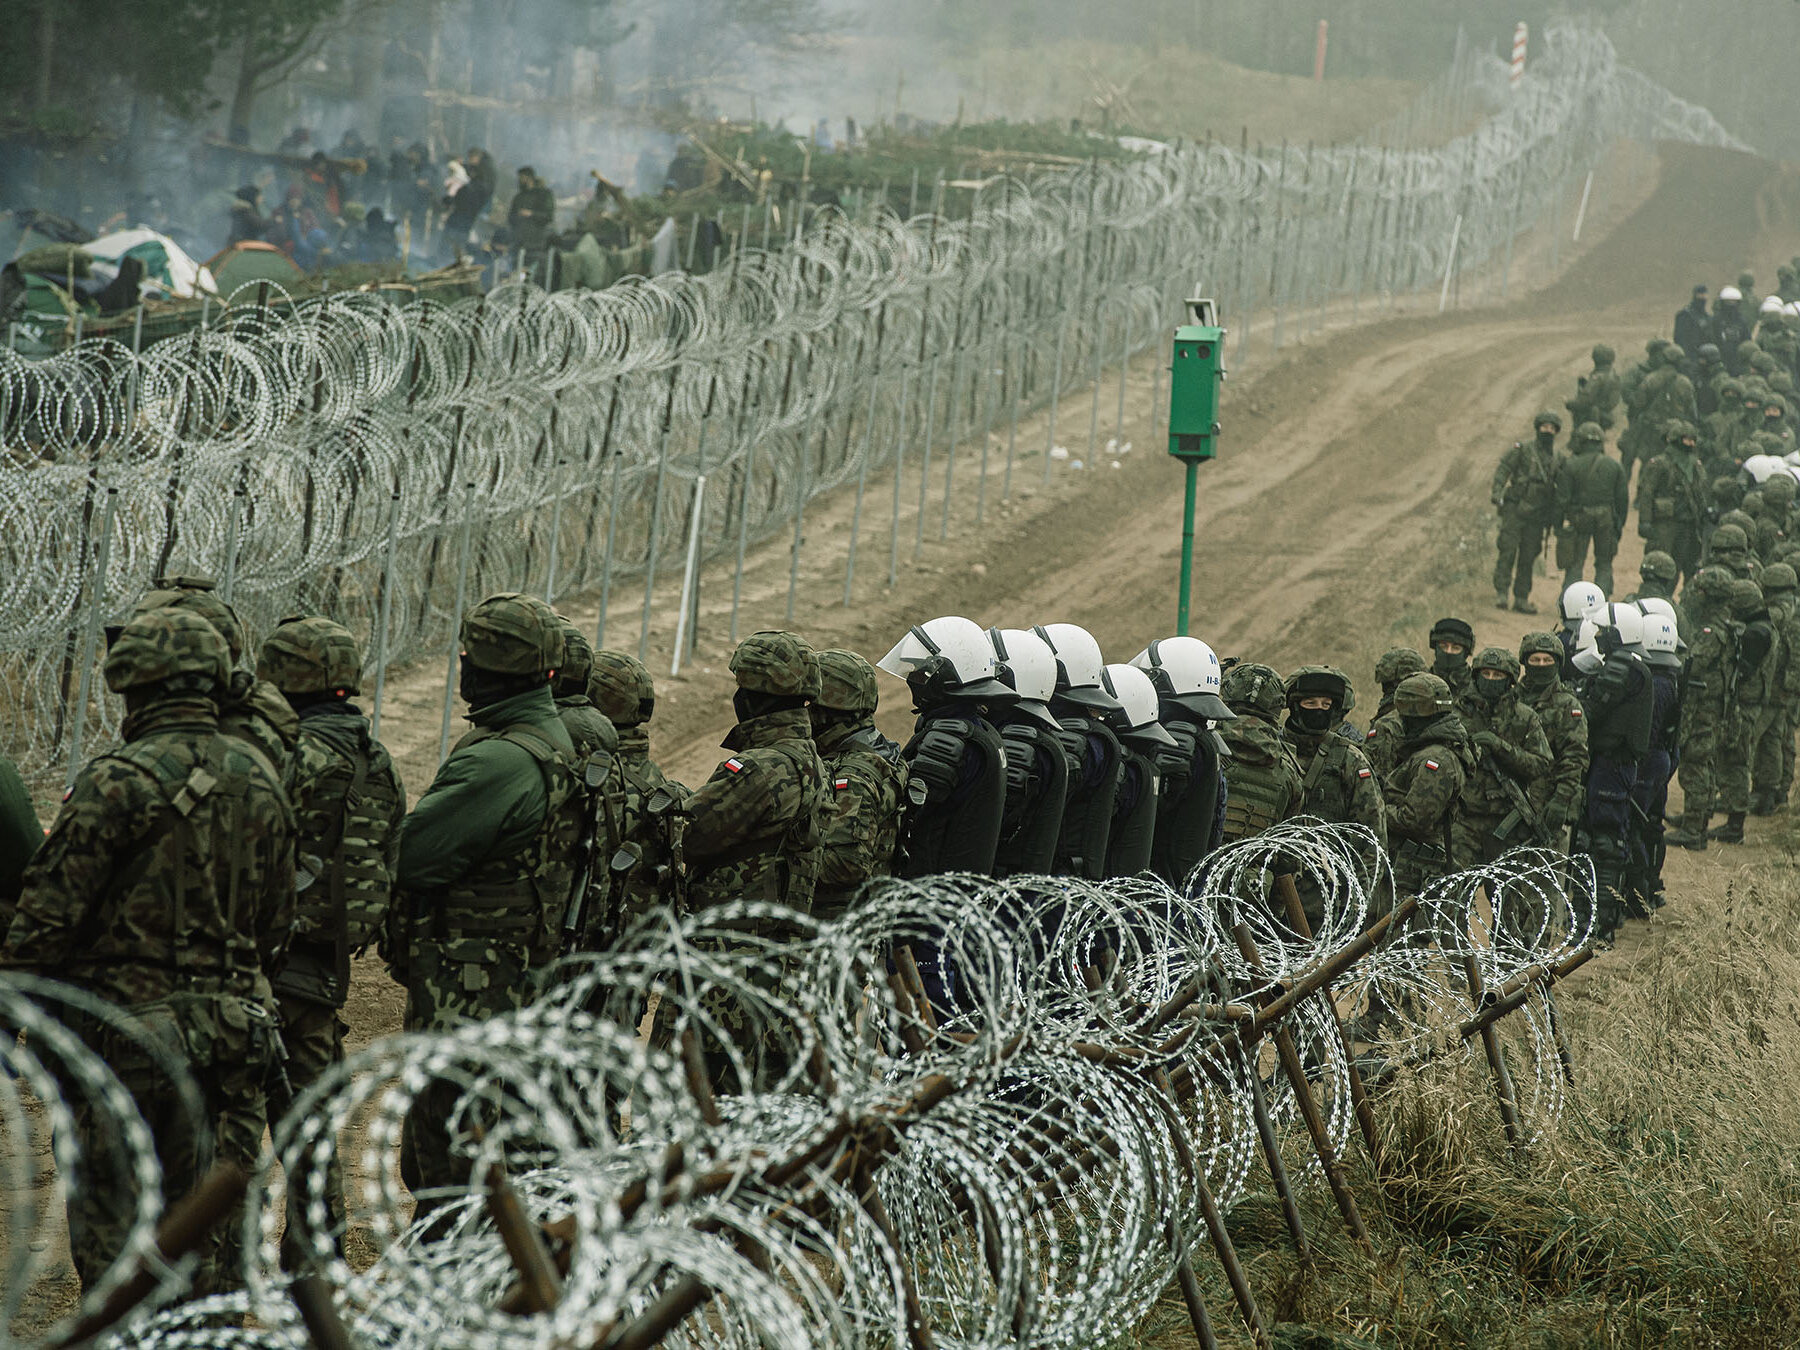 Polish-Belarusian border.  Scientists in "Science": The wall may cause more harm than good